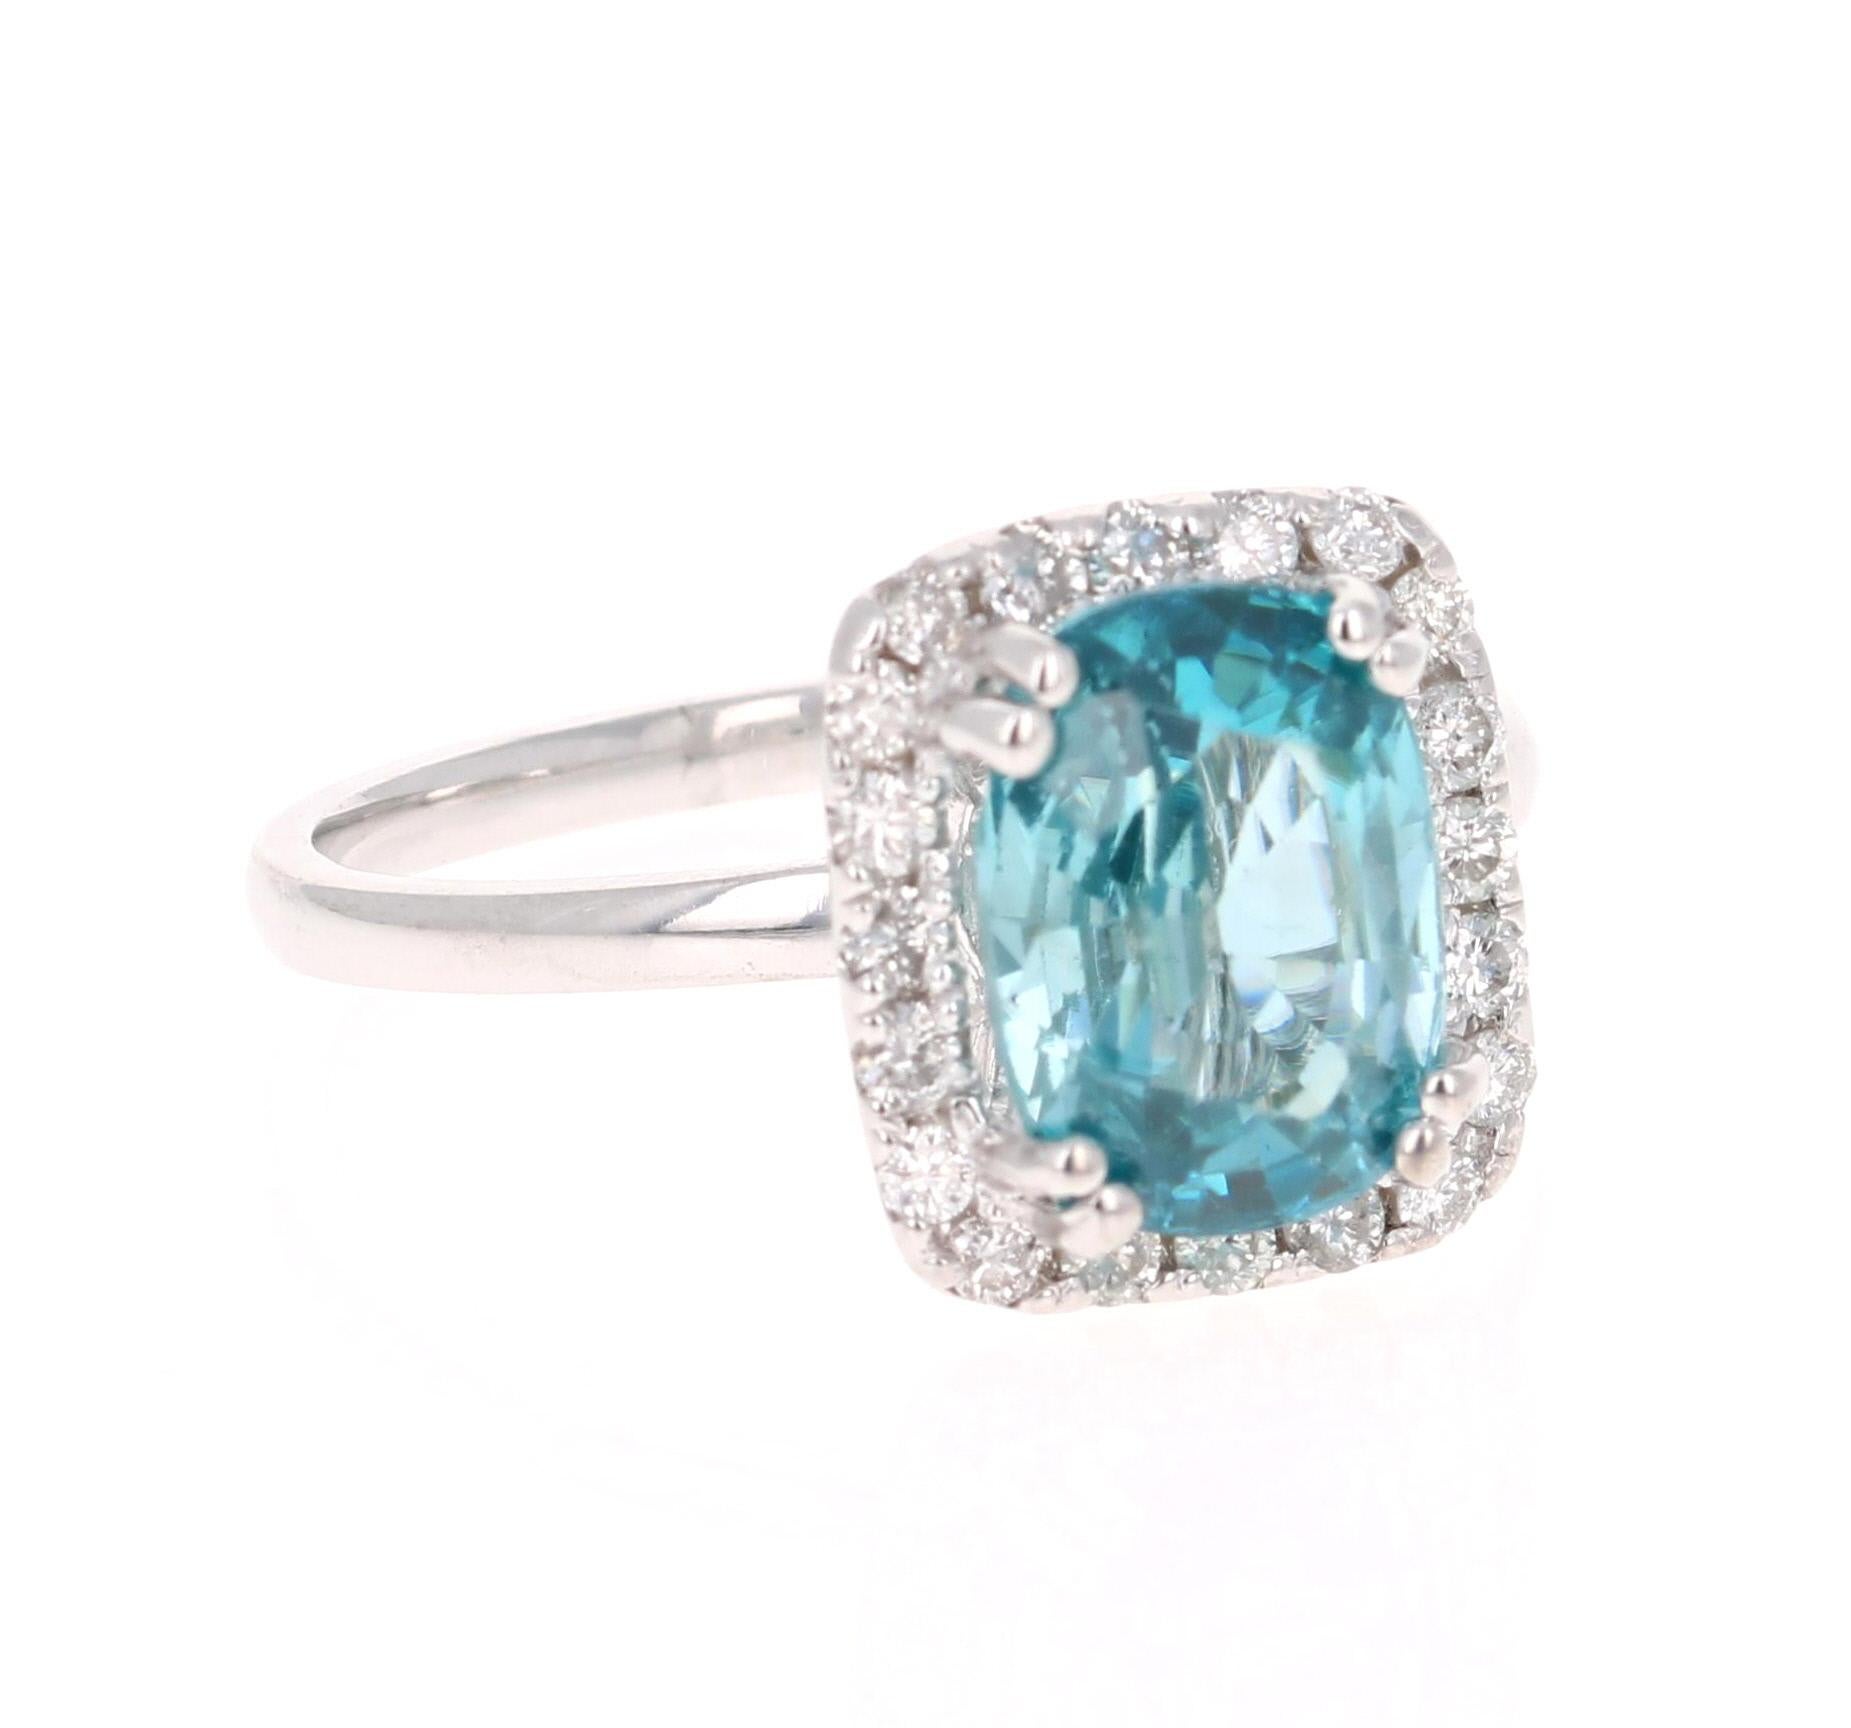 A Dazzling Blue Zircon and Diamond Ring! Blue Zircon is a natural stone mined in different parts of the world, mainly Sri Lanka, Myanmar, and Australia. 

This Oval Cut Blue Zircon is 3.94 Carats and is surrounded by a halo of 20 Round Cut Diamonds